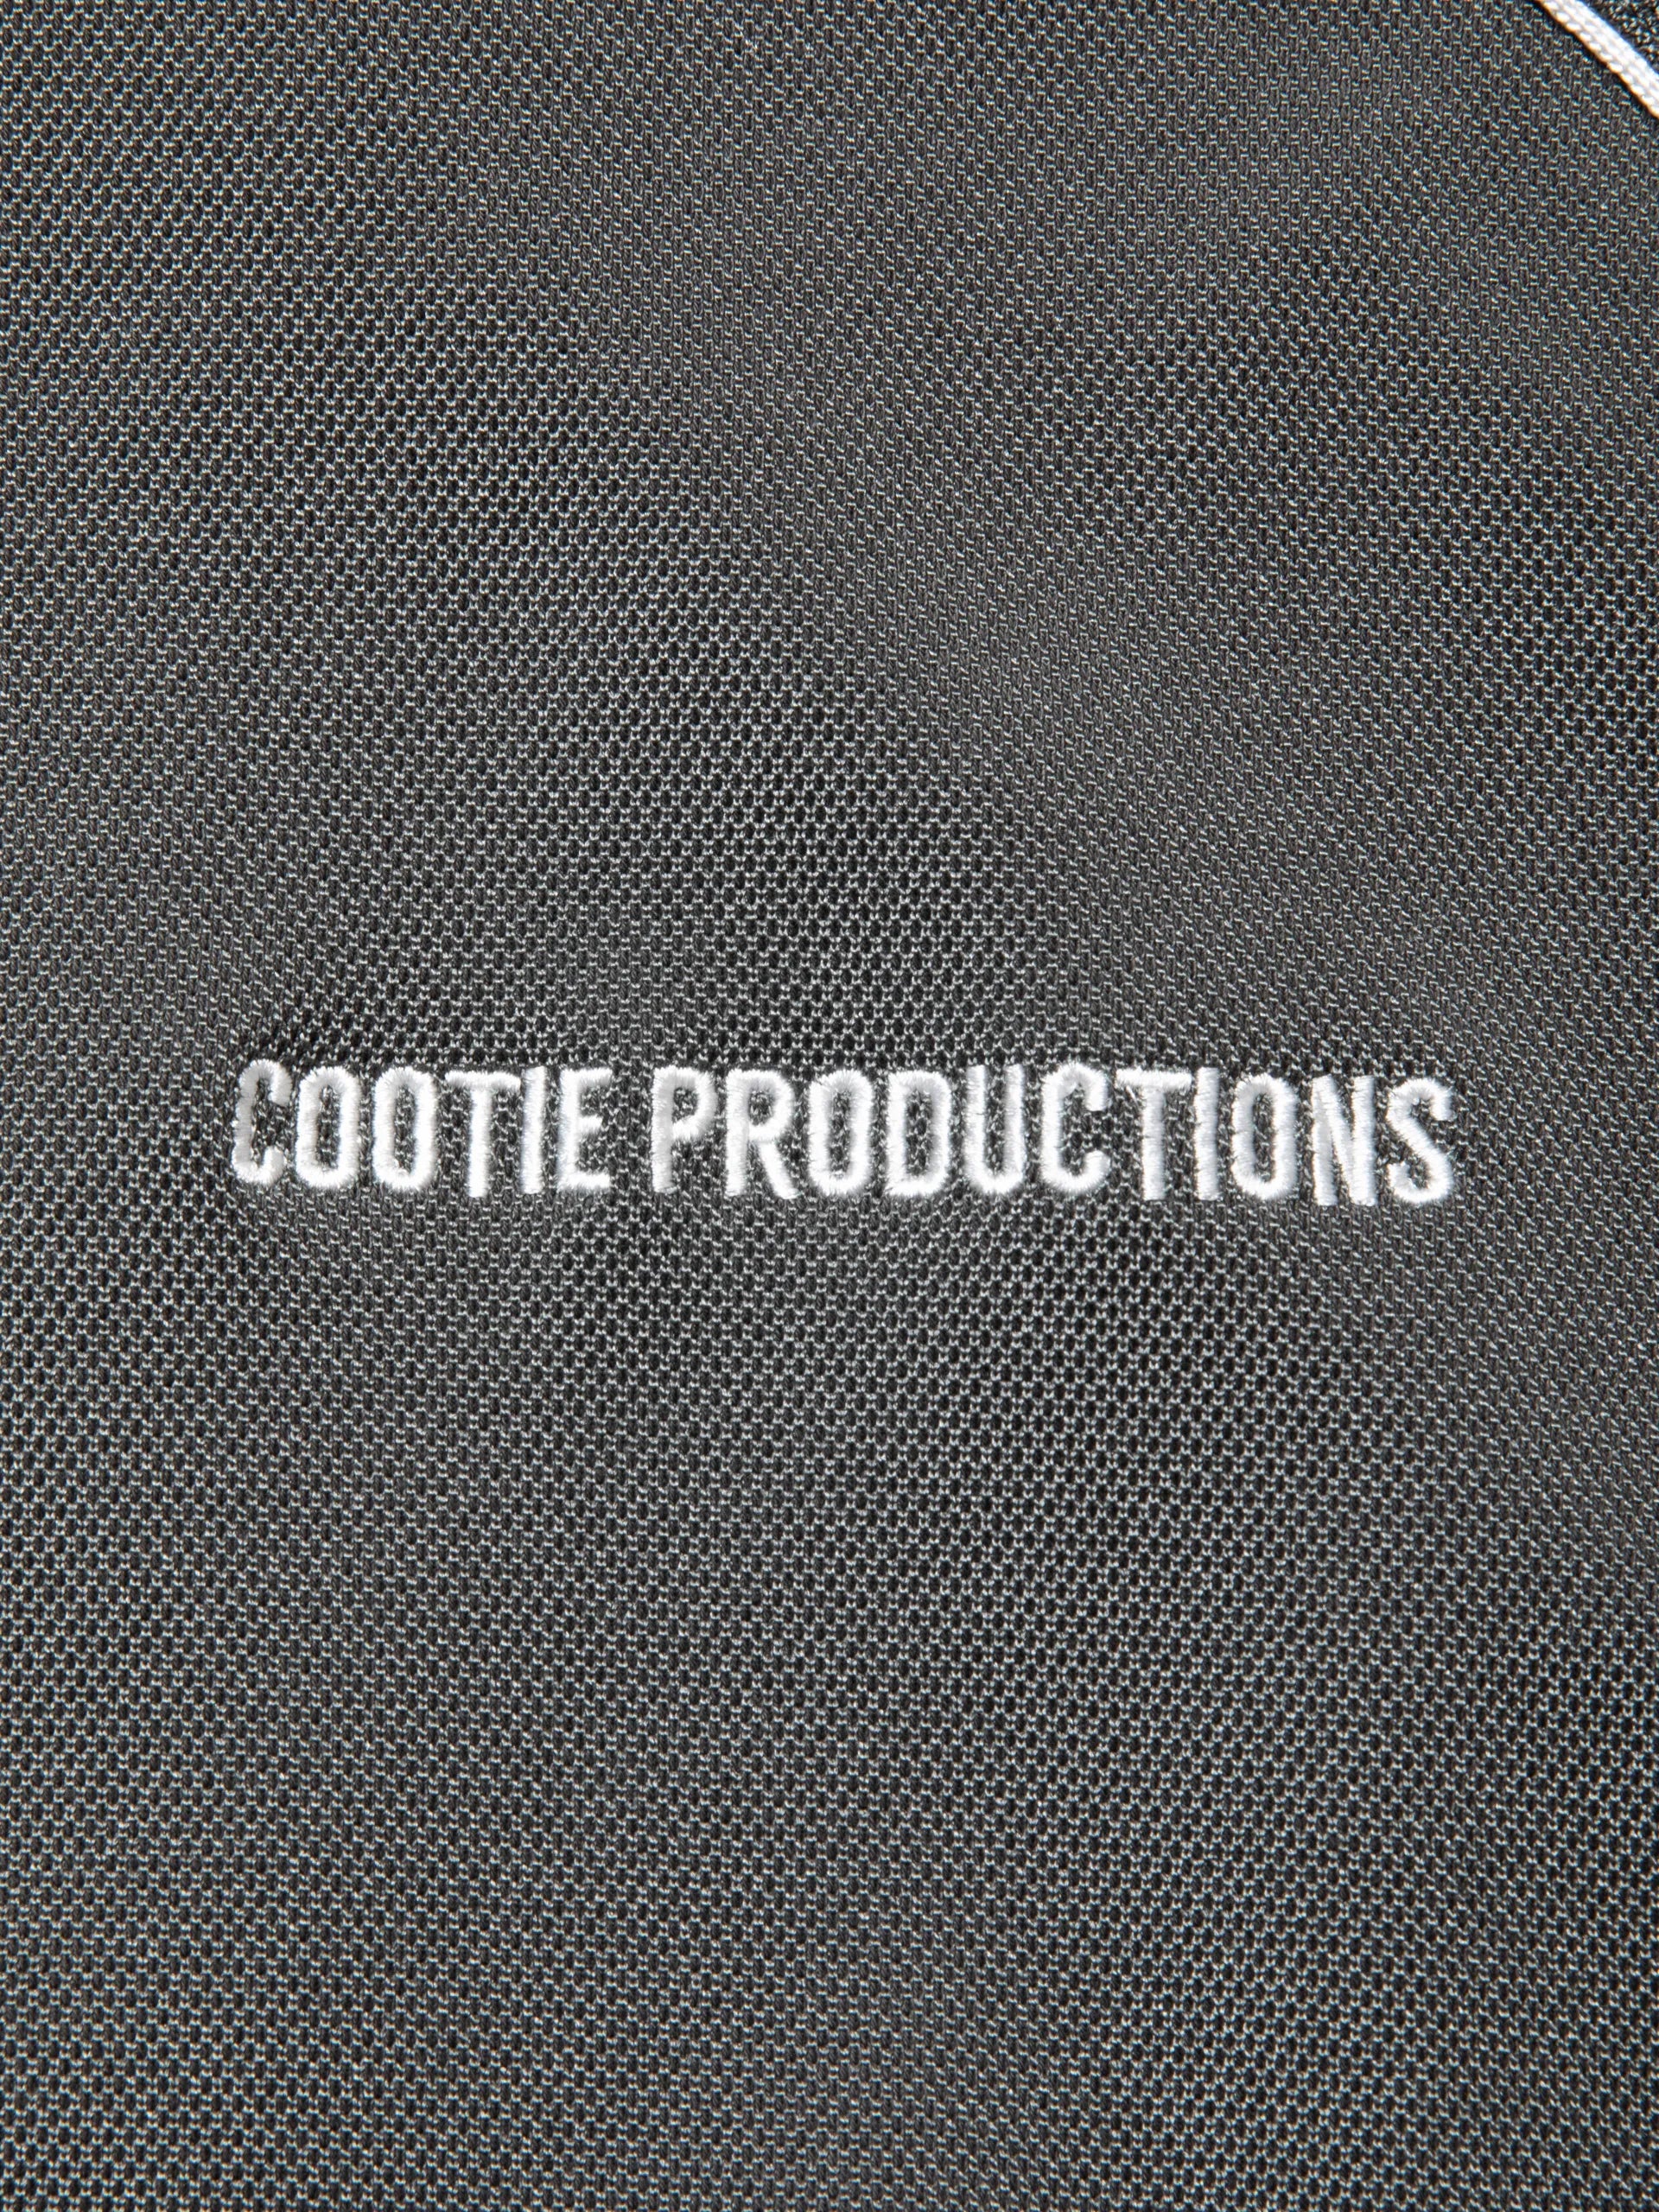 COOTIE PRODUCTIONS® / T/C Seed Stitch Training Top (CTE-24S311)